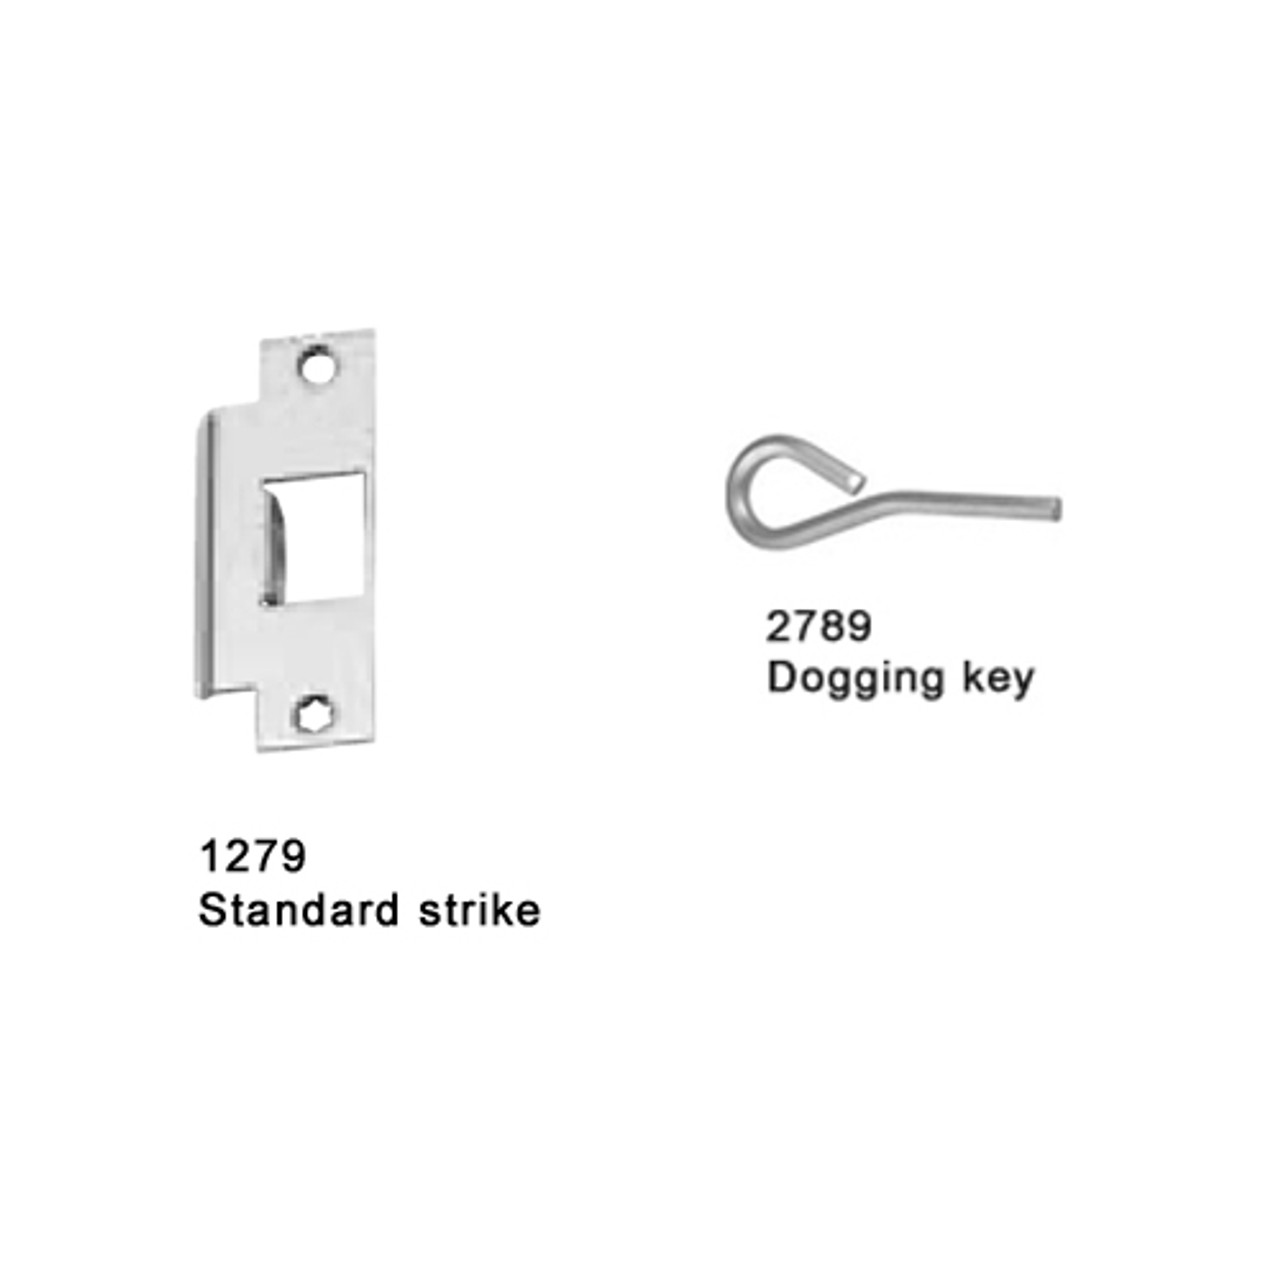 25-M-TP-BE-US32-3-LHR Falcon 25 Series Mortise Lock Devices 512TP-BE Thumbpiece Trim with Blank Escutcheon in Polished Stainless Steel